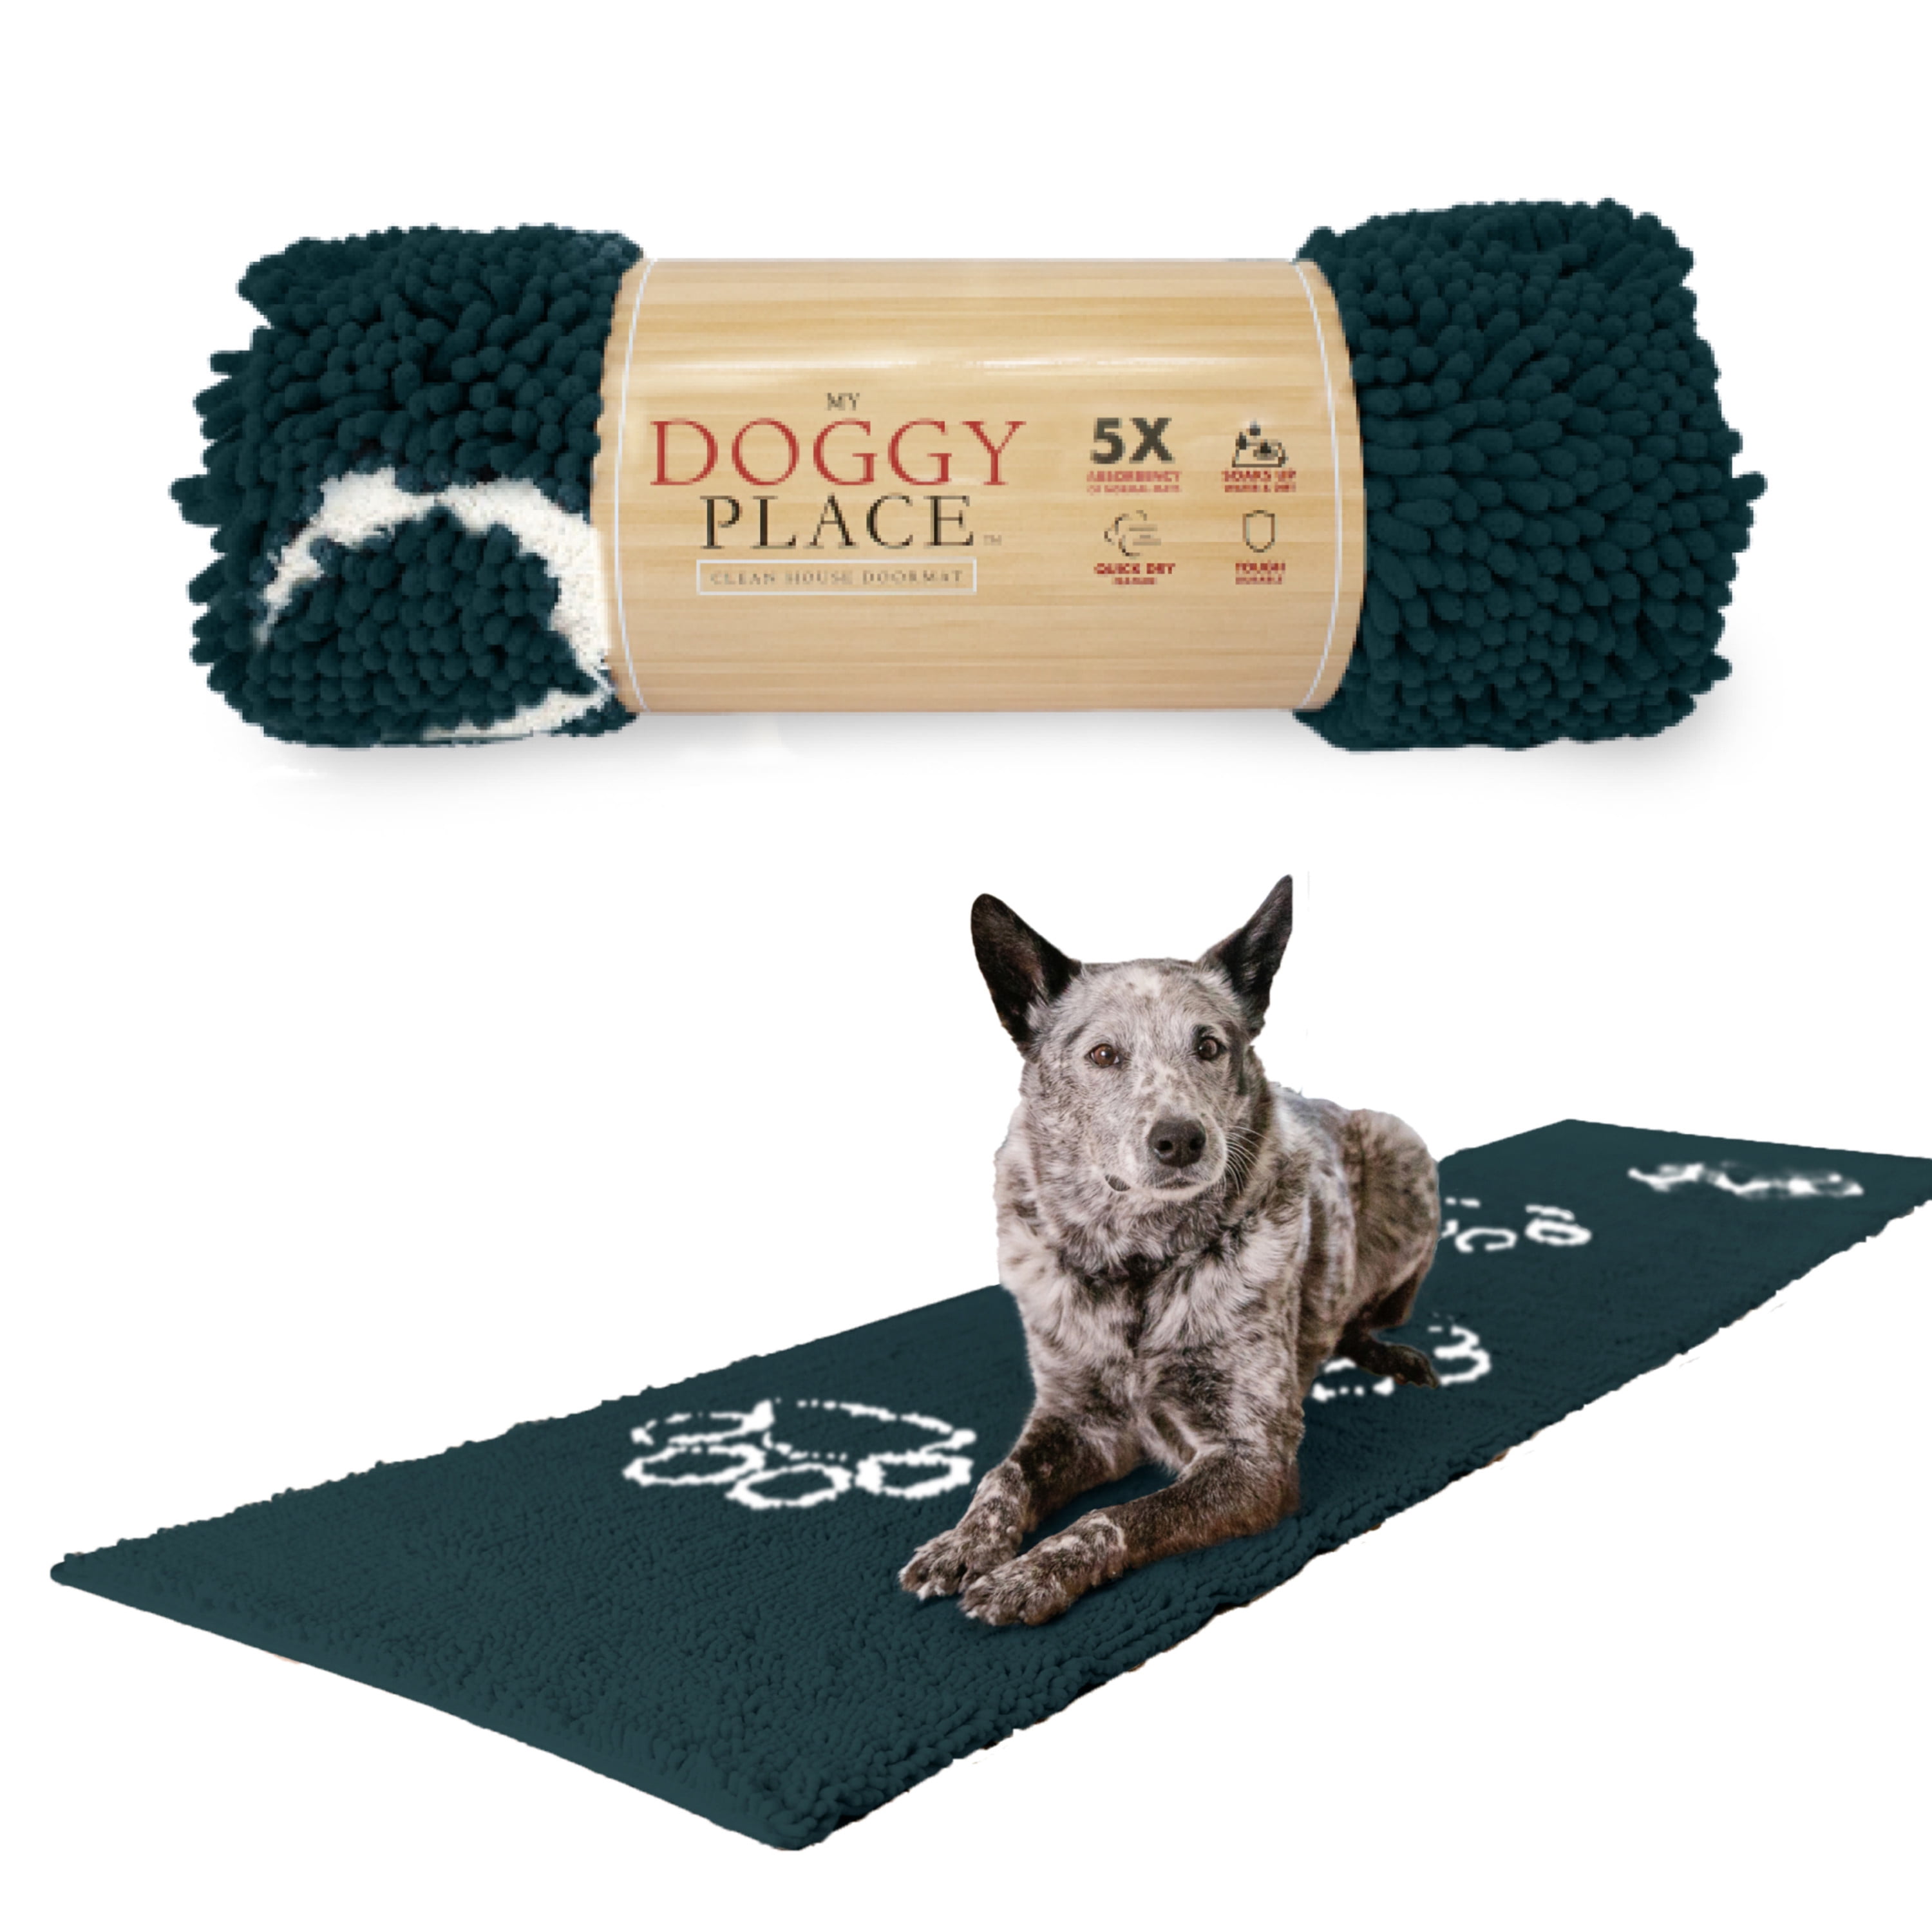 OLANLY Dog Door Mat for Muddy Paws, Absorbs Moisture and Dirt